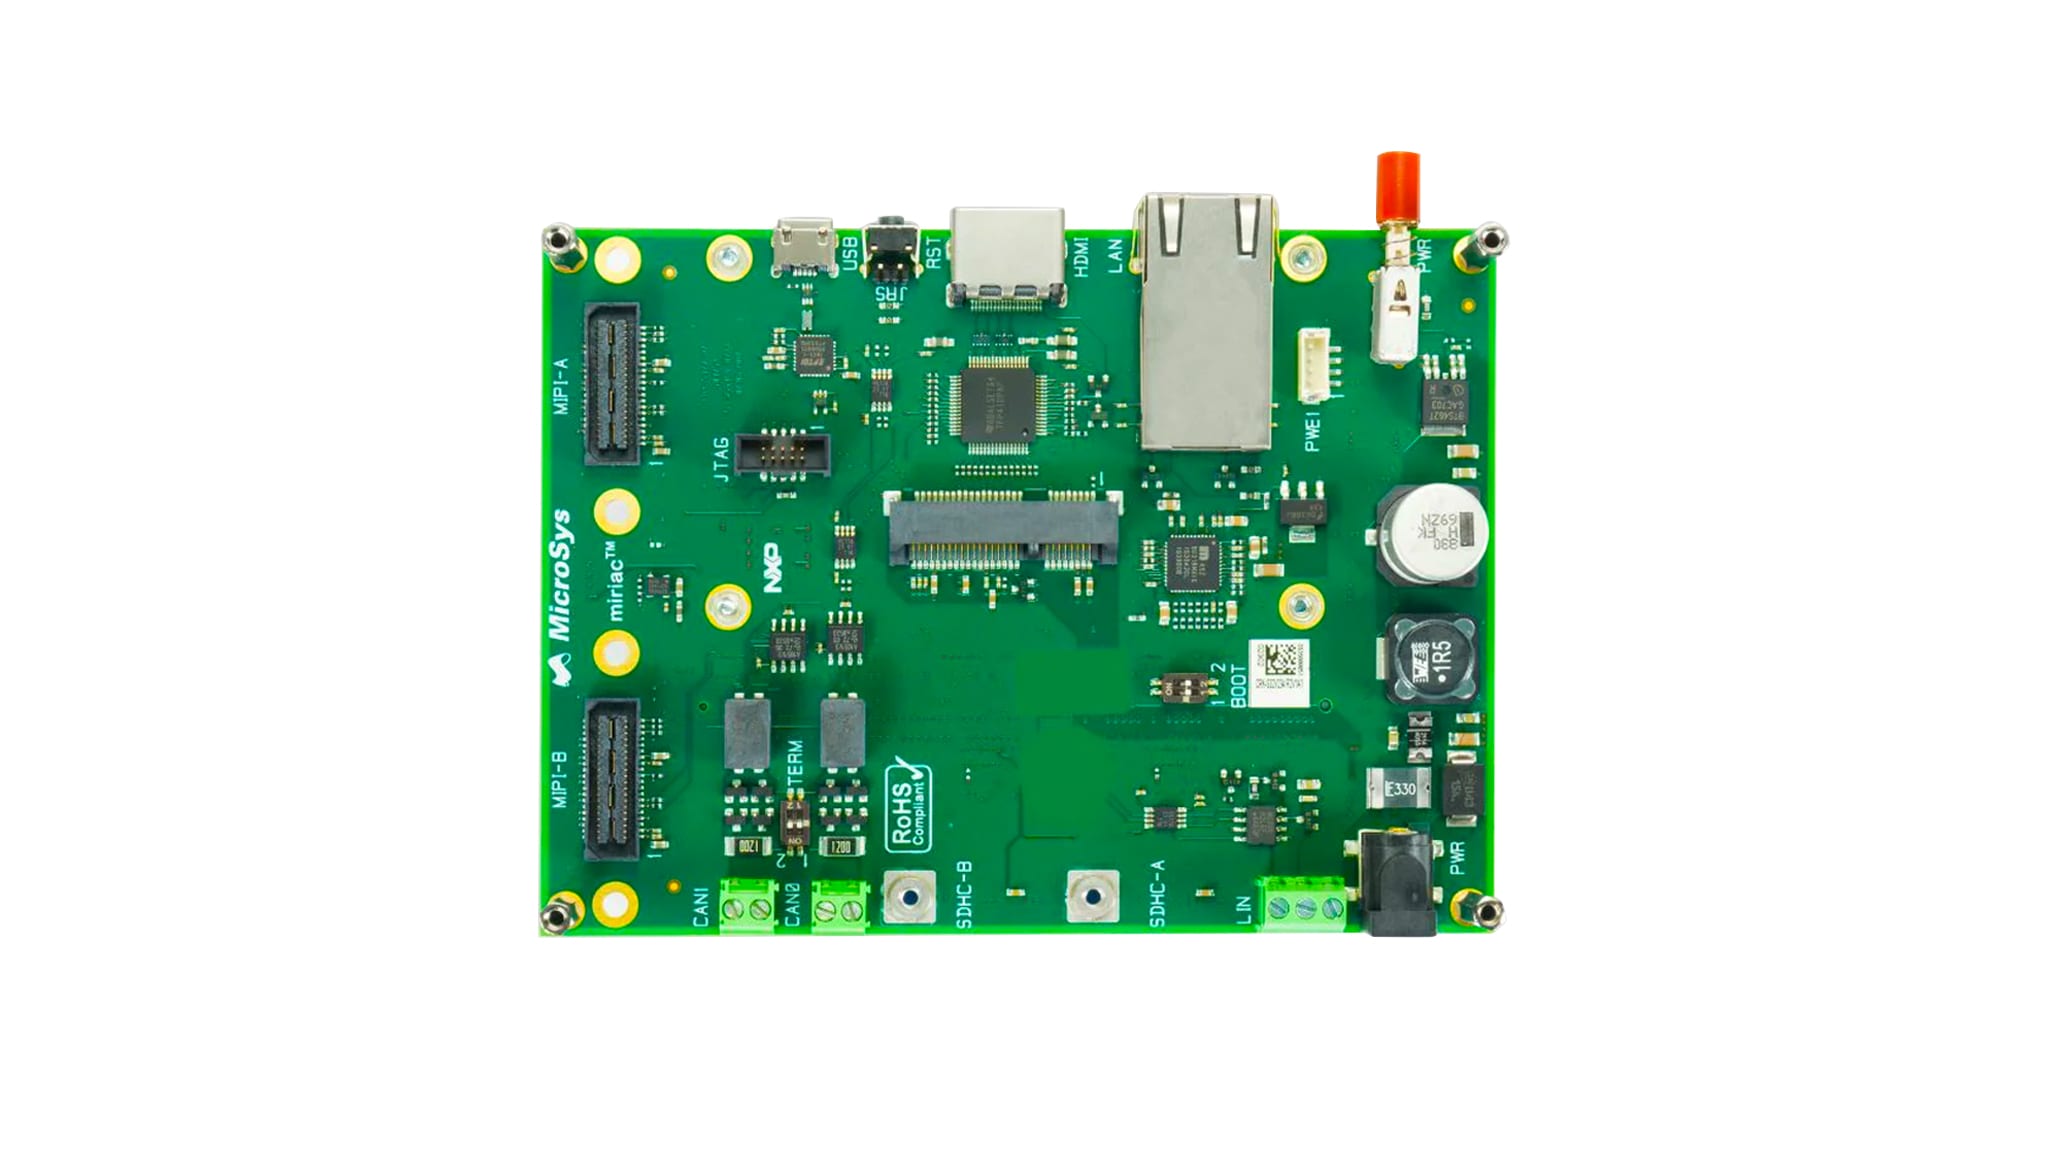 S32V2 Vision and Sensor Fusion low-cost Evaluation Board 